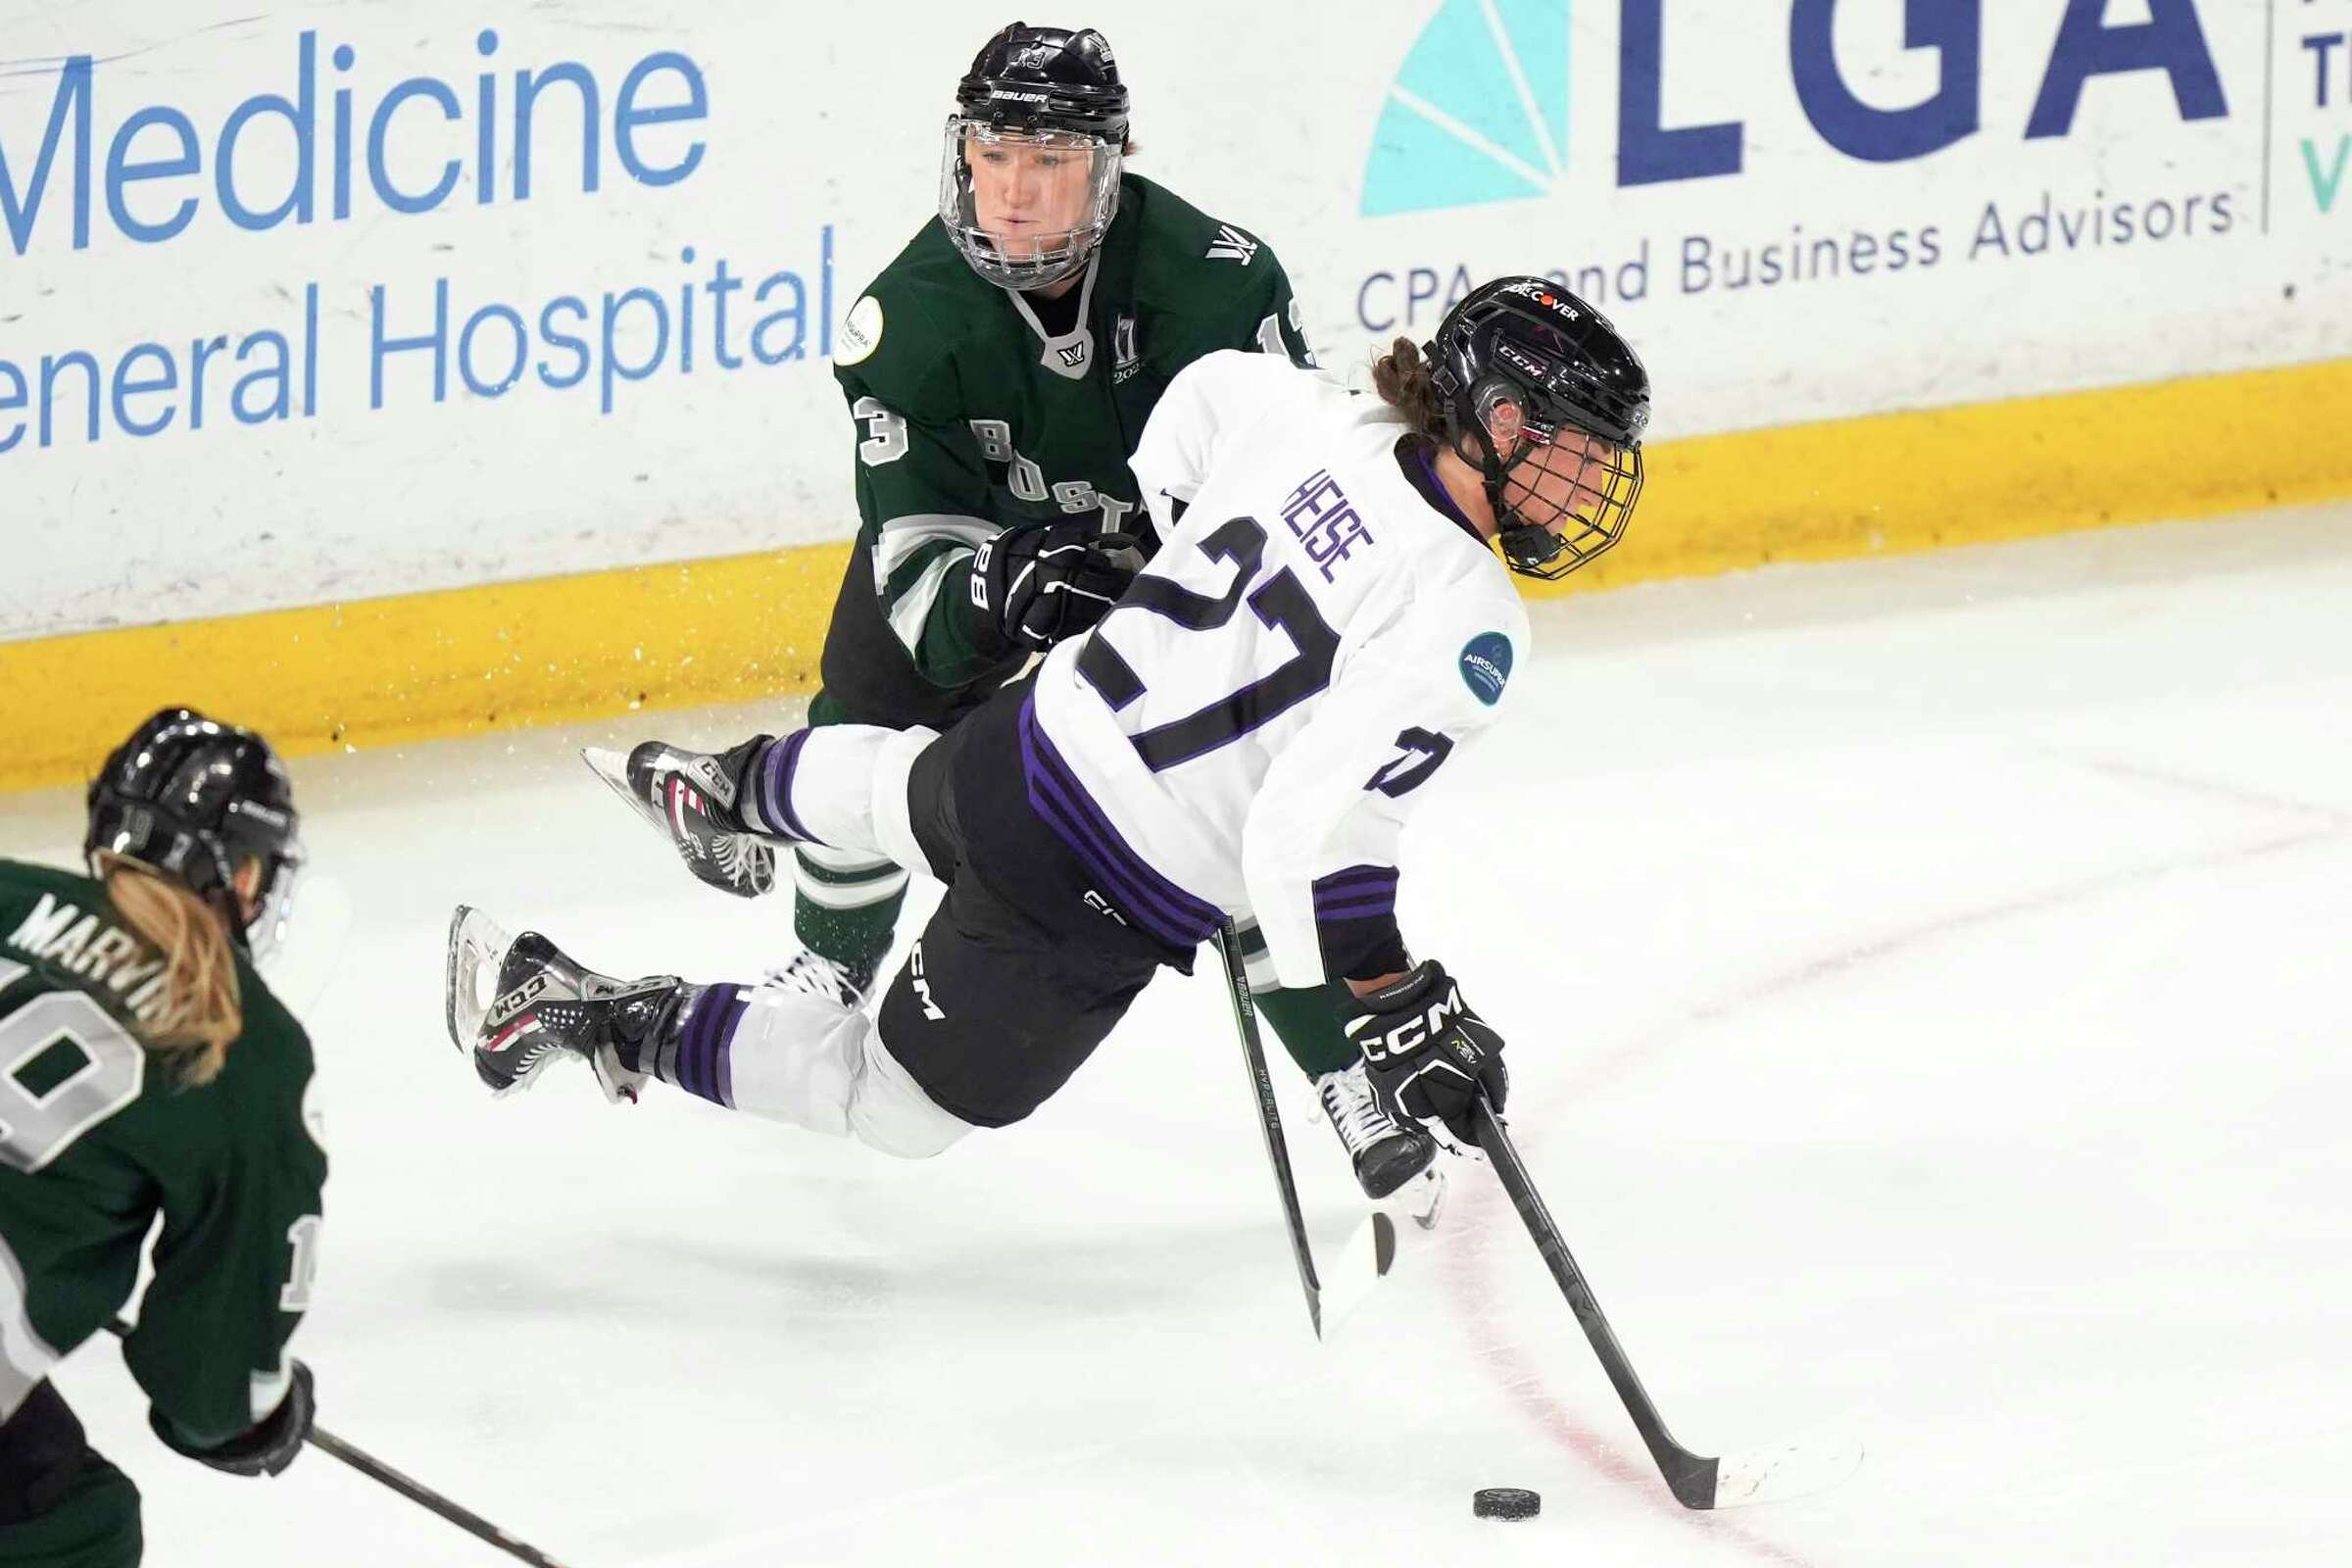 Healey's goal in 2nd period gives Boston 4-3 win in first game of PWHL ...